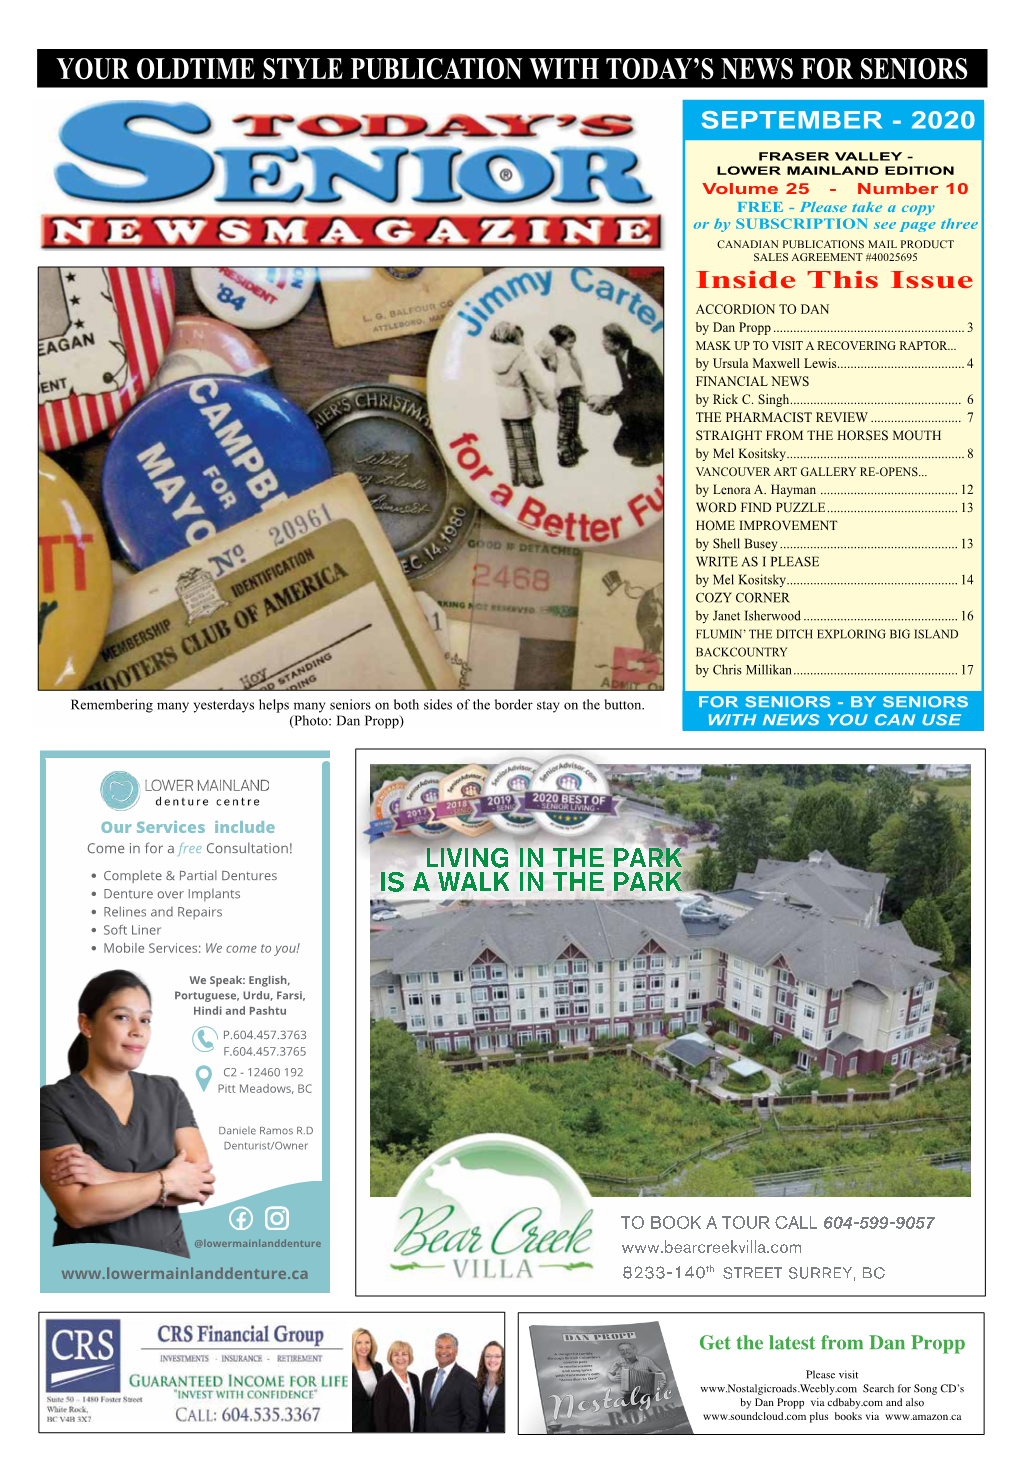 Your Oldtime Style Publication with Today's News for Seniors